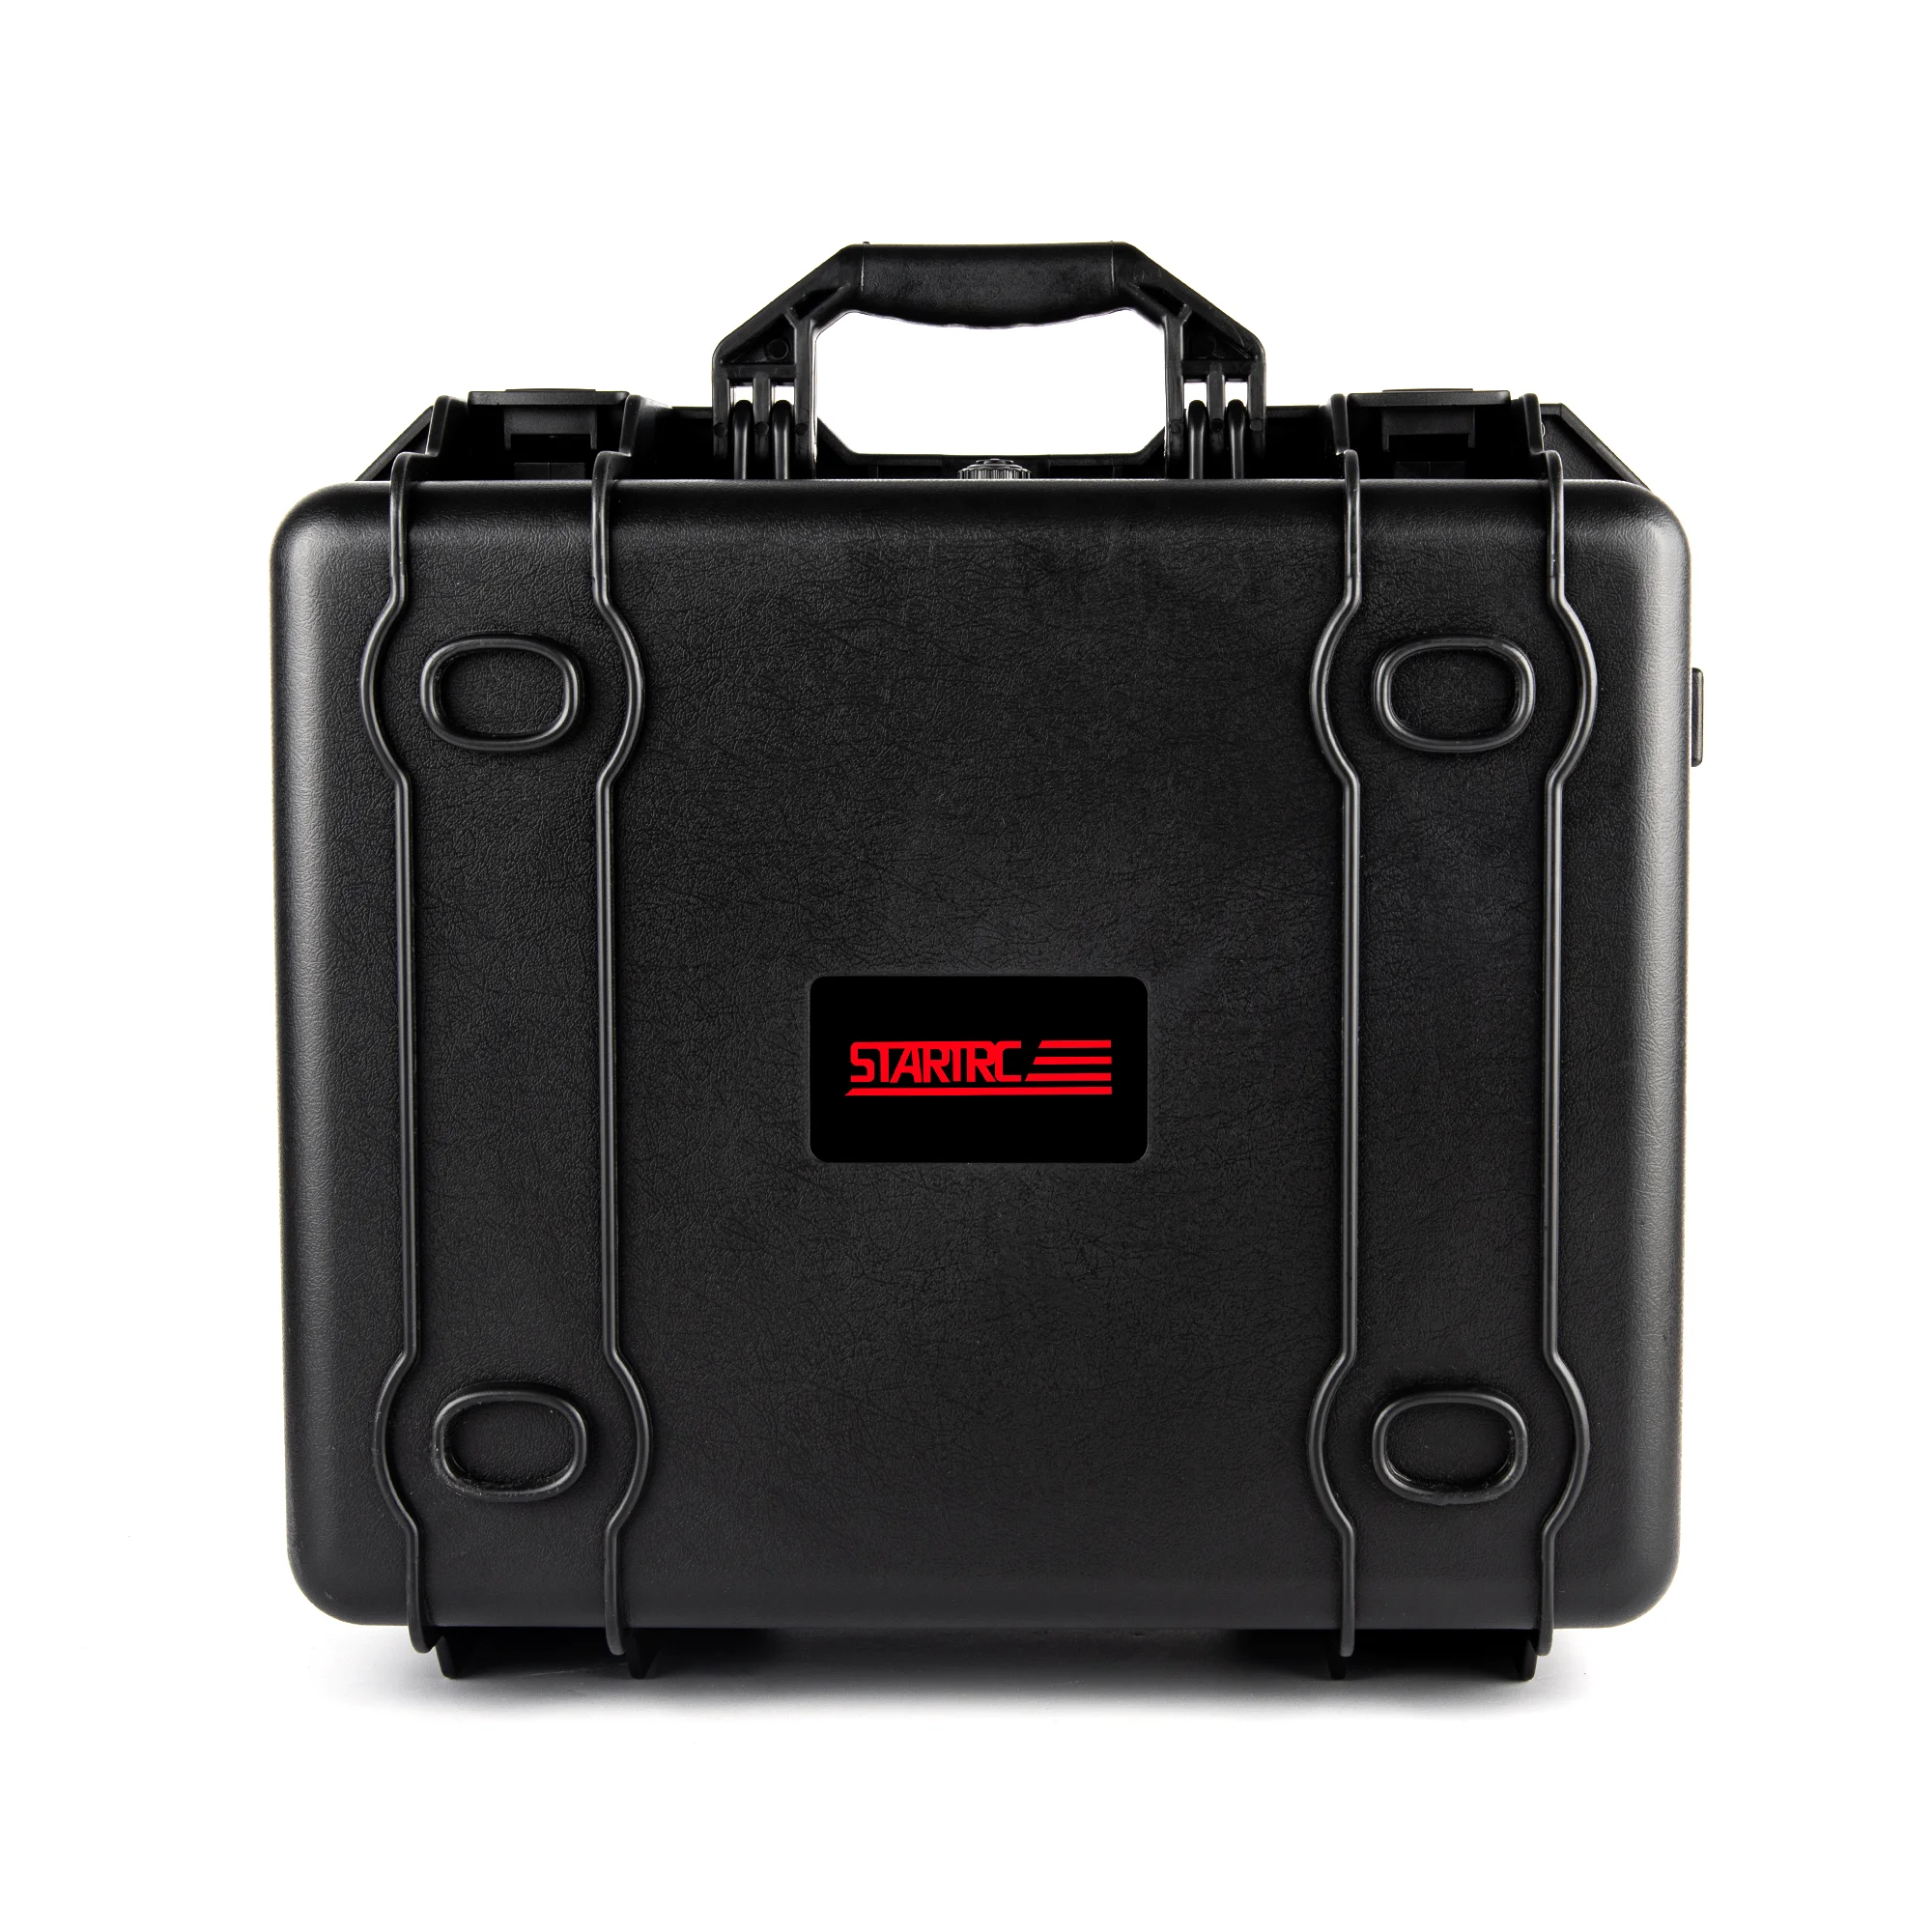 Portable Hard Case ABS Waterproof Carrying Travel Drone Boxes Storage Bag Larage Size for DJI PFV Combo Camera Drone Accessories enlarge